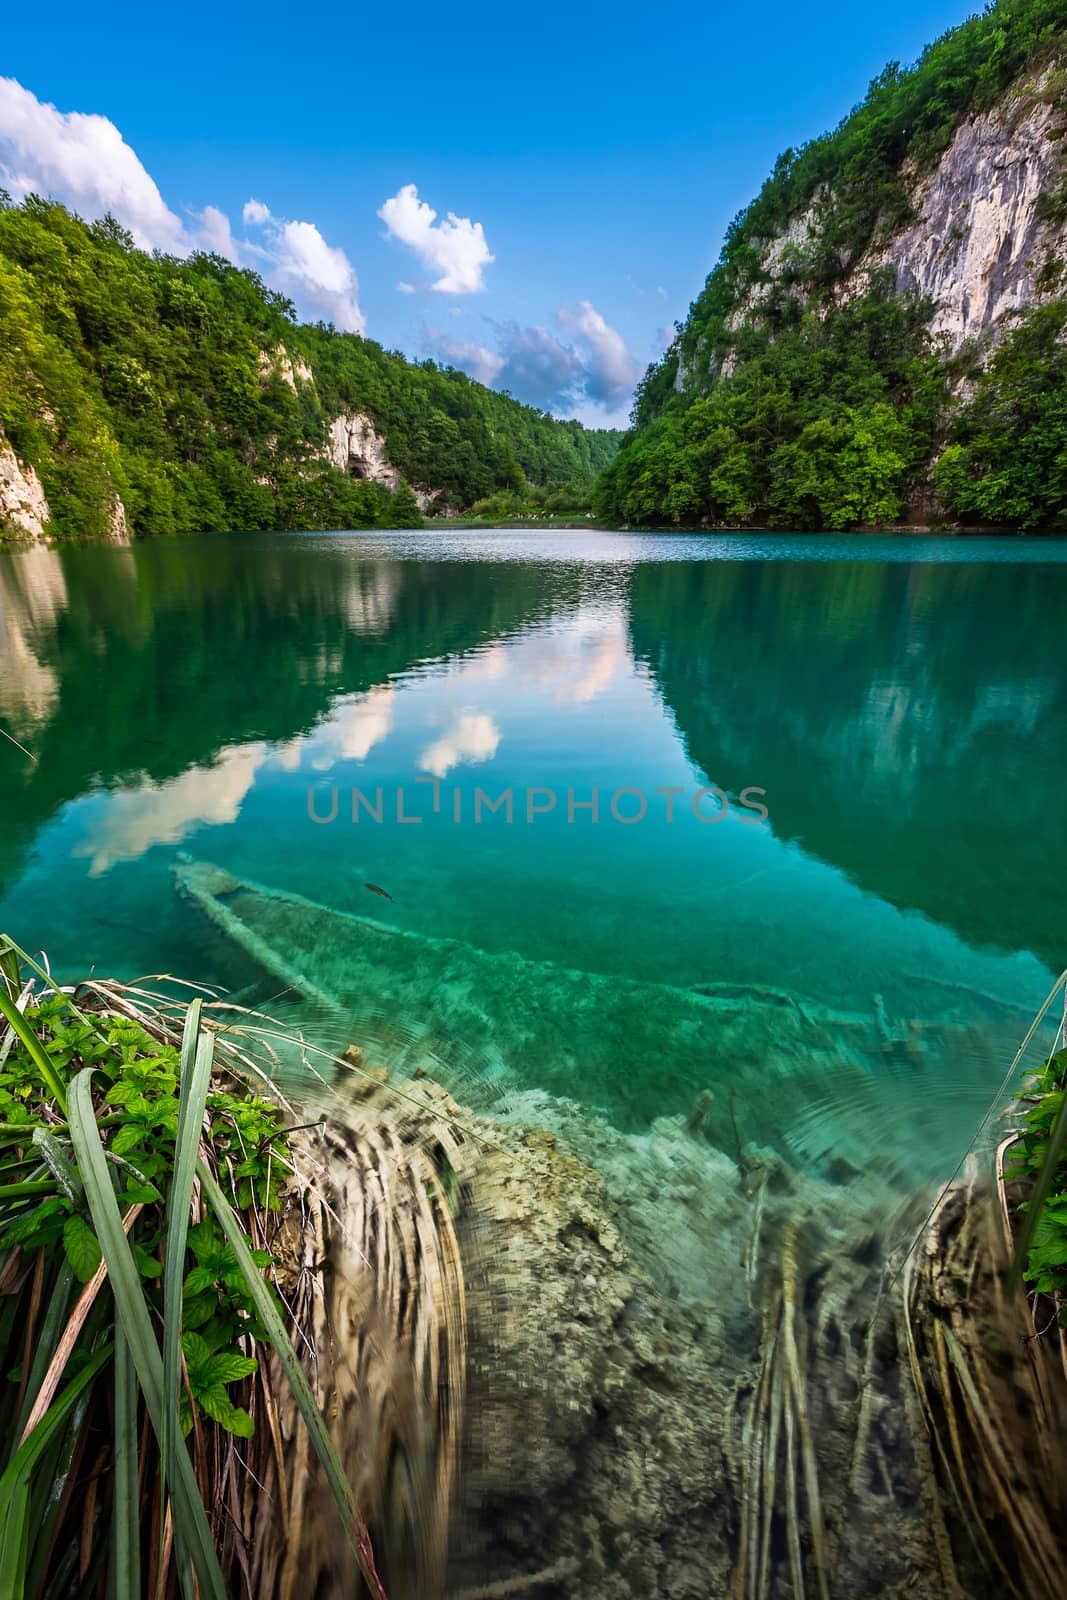 Sunk Boat in Plitvice Lakes National Park in Croatia by anshar